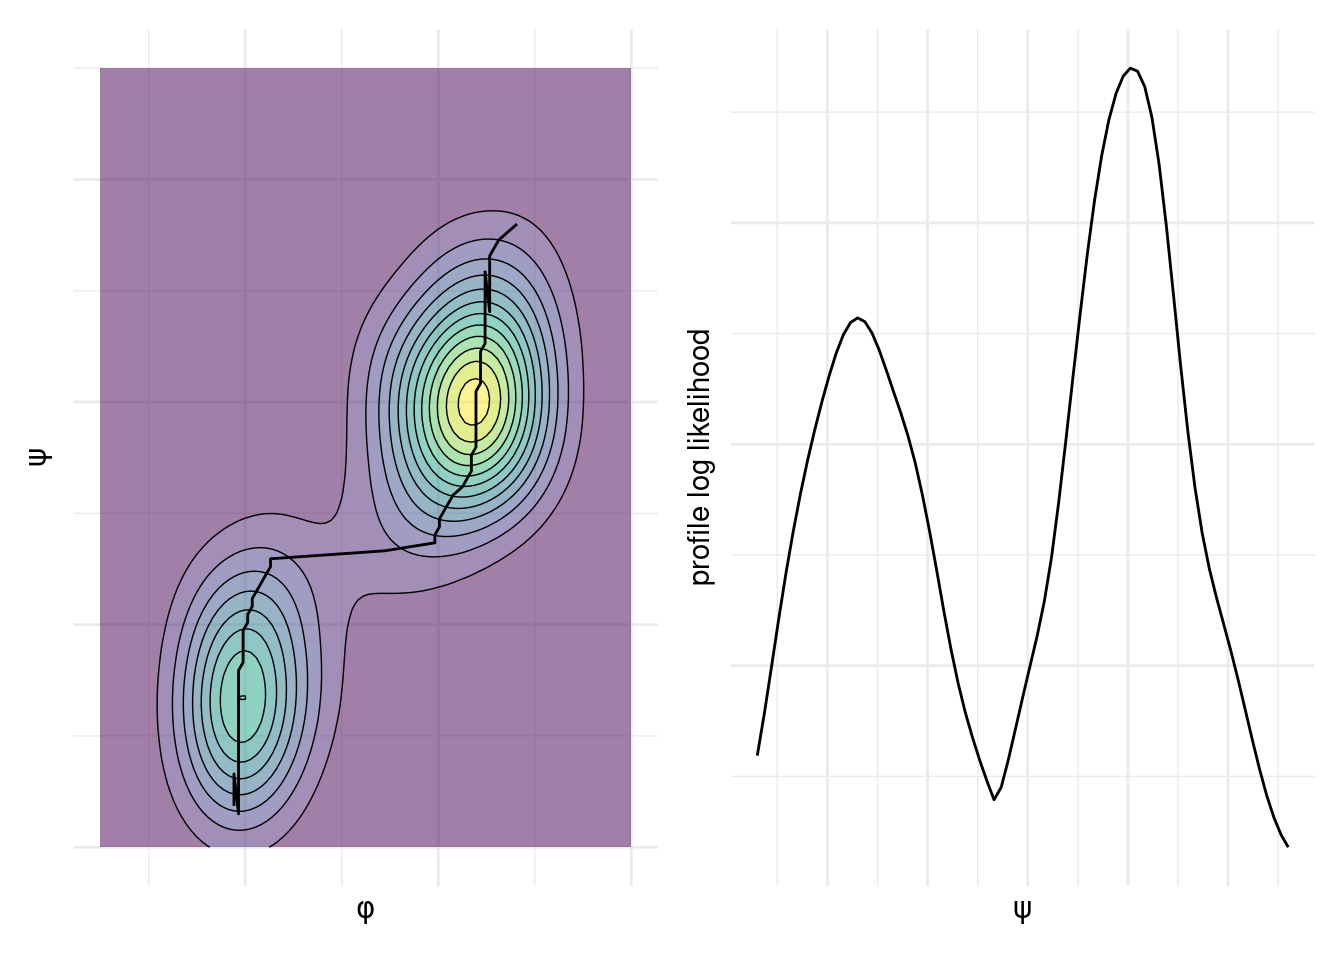 Two-dimensional log likelihood surface with a parameter of interest $\psi$ and a nuisance parameter $\varphi$; the contour plot shows area of higher likelihood, and the black line is the profile log likelihood, also shown as a function of $\psi$ on the right panel.